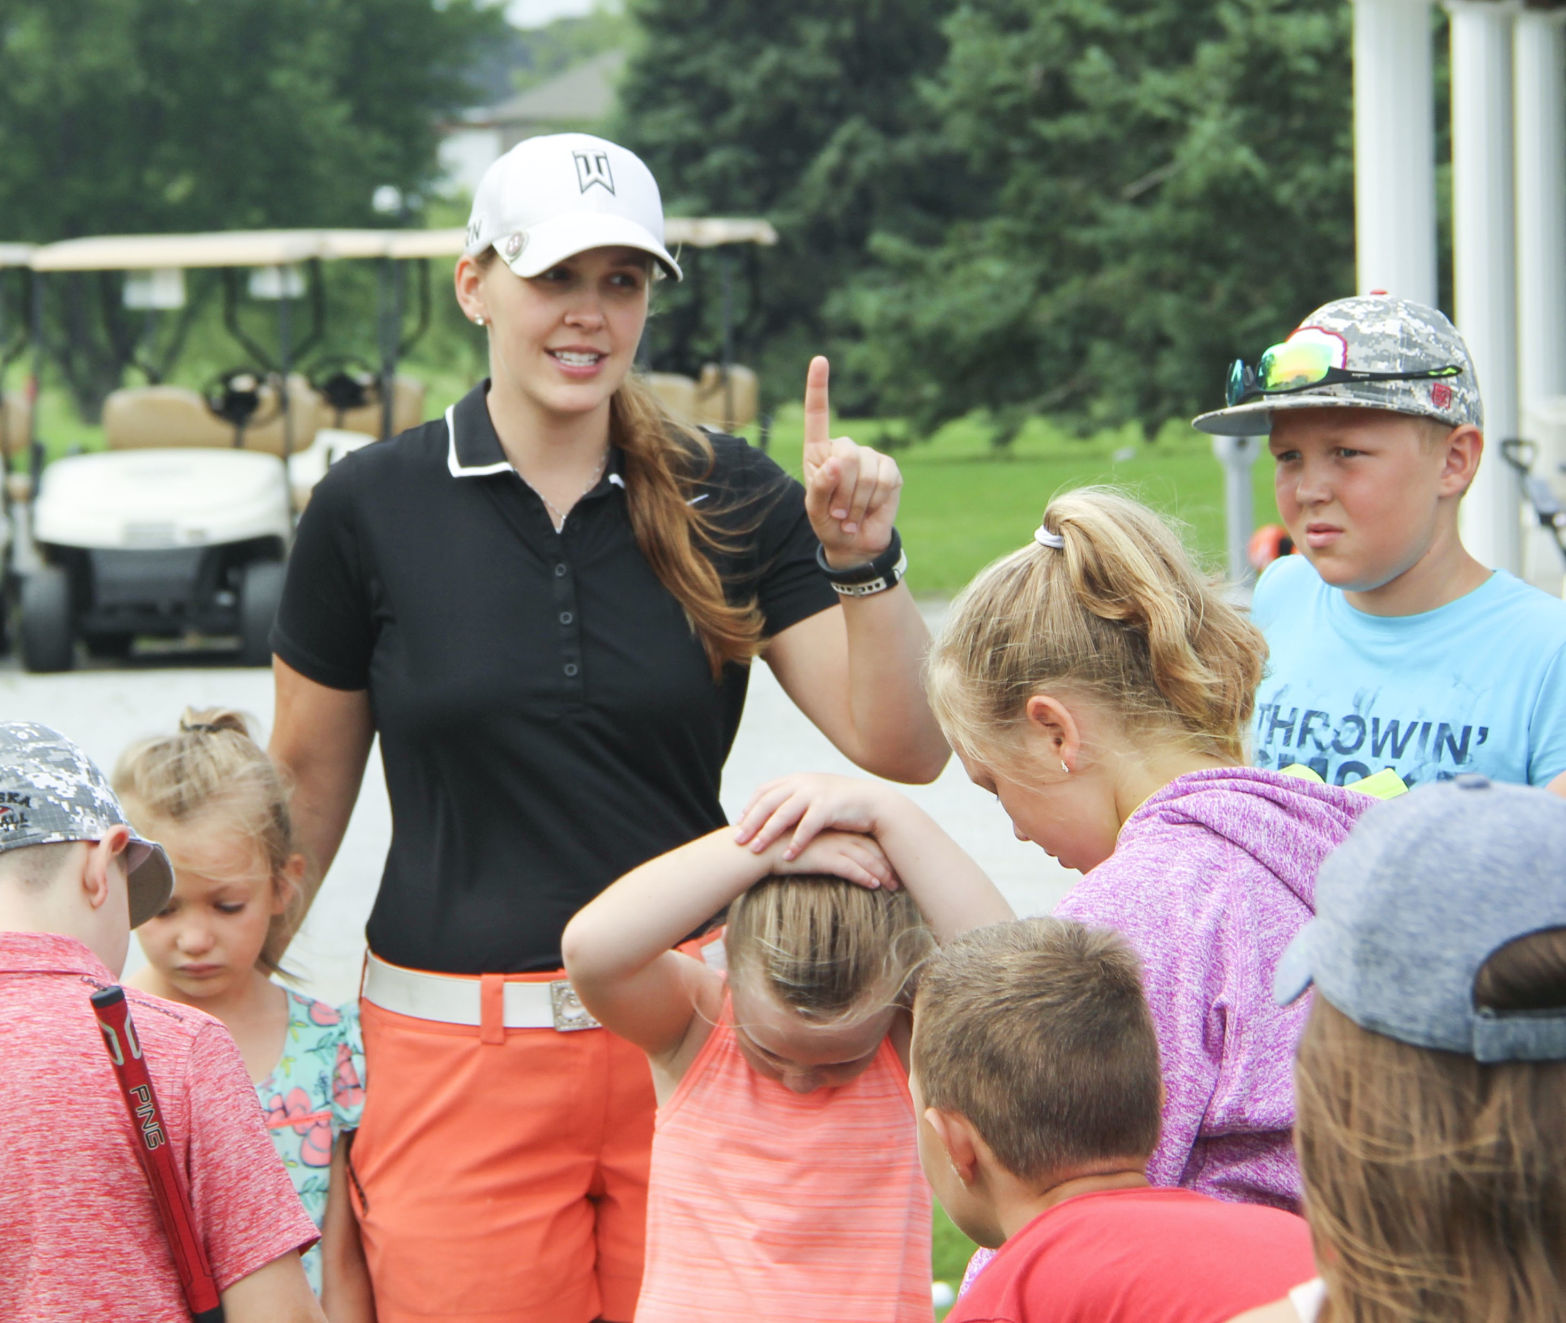 Briana Werner explains the day's activities to campers at a golf camp June 28.